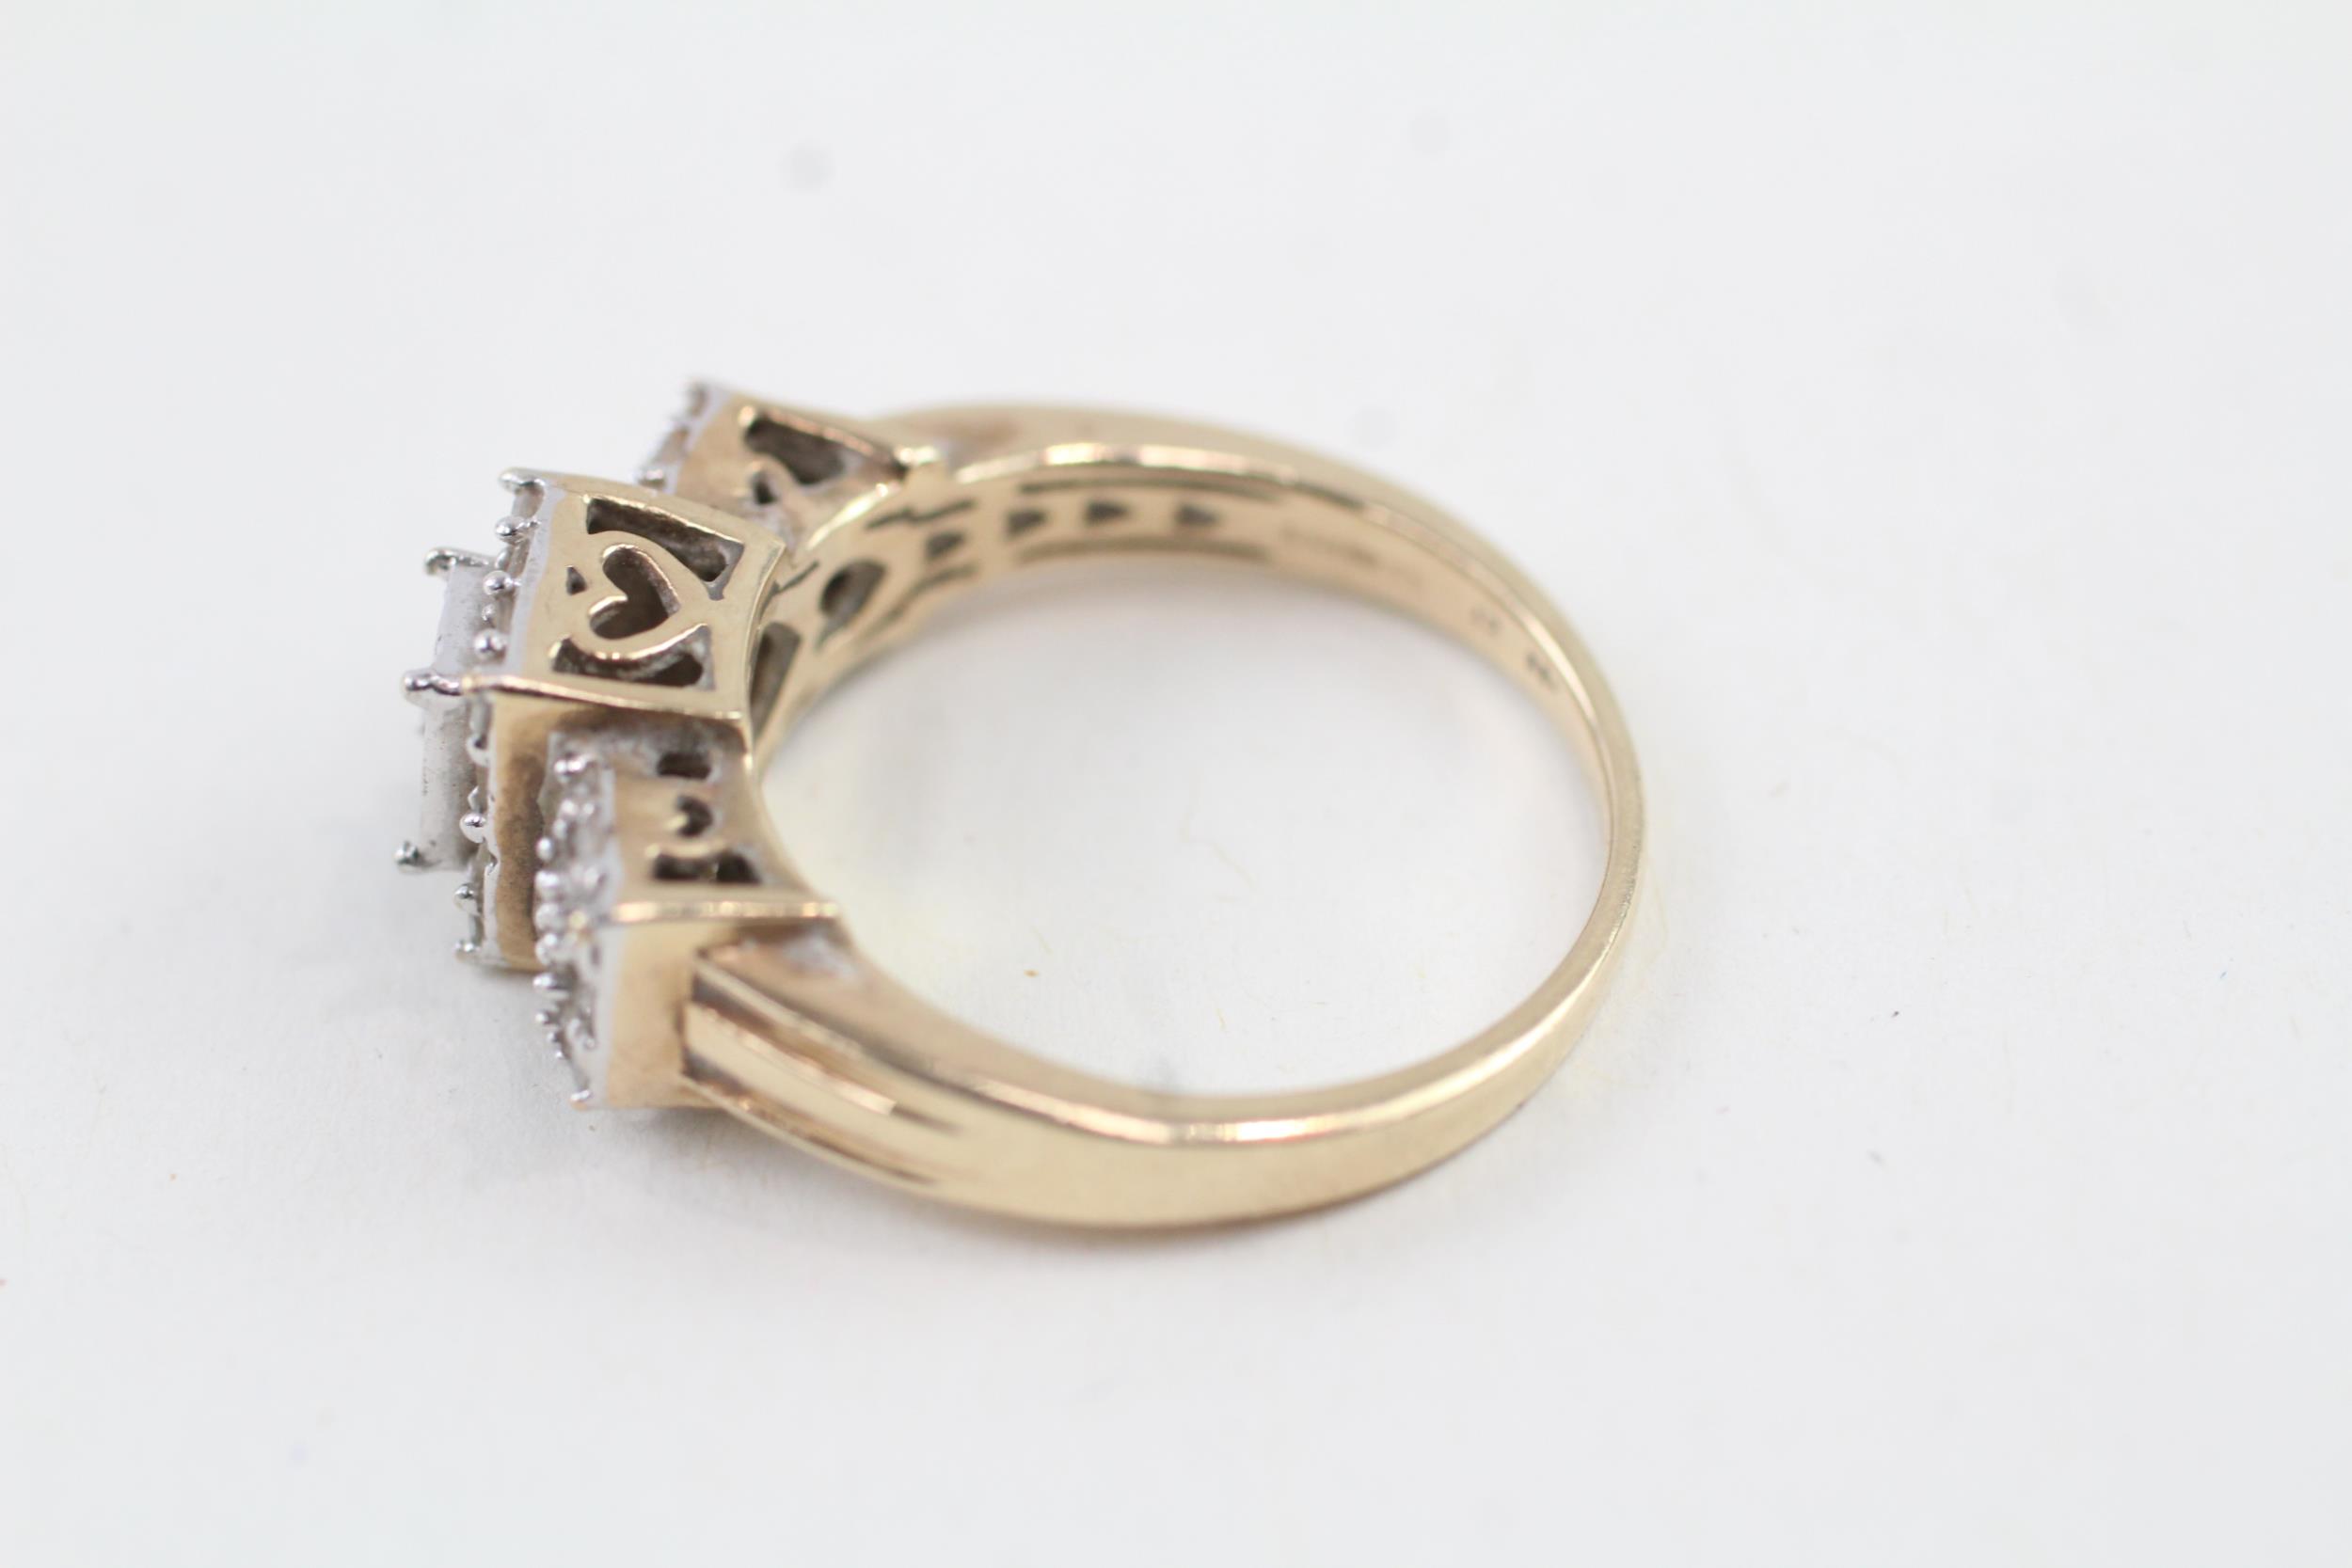 9ct gold vari-cut diamond dress ring, total diamond weight 0.25ct approximately (3.9g) Size N 1/2 - Image 2 of 5